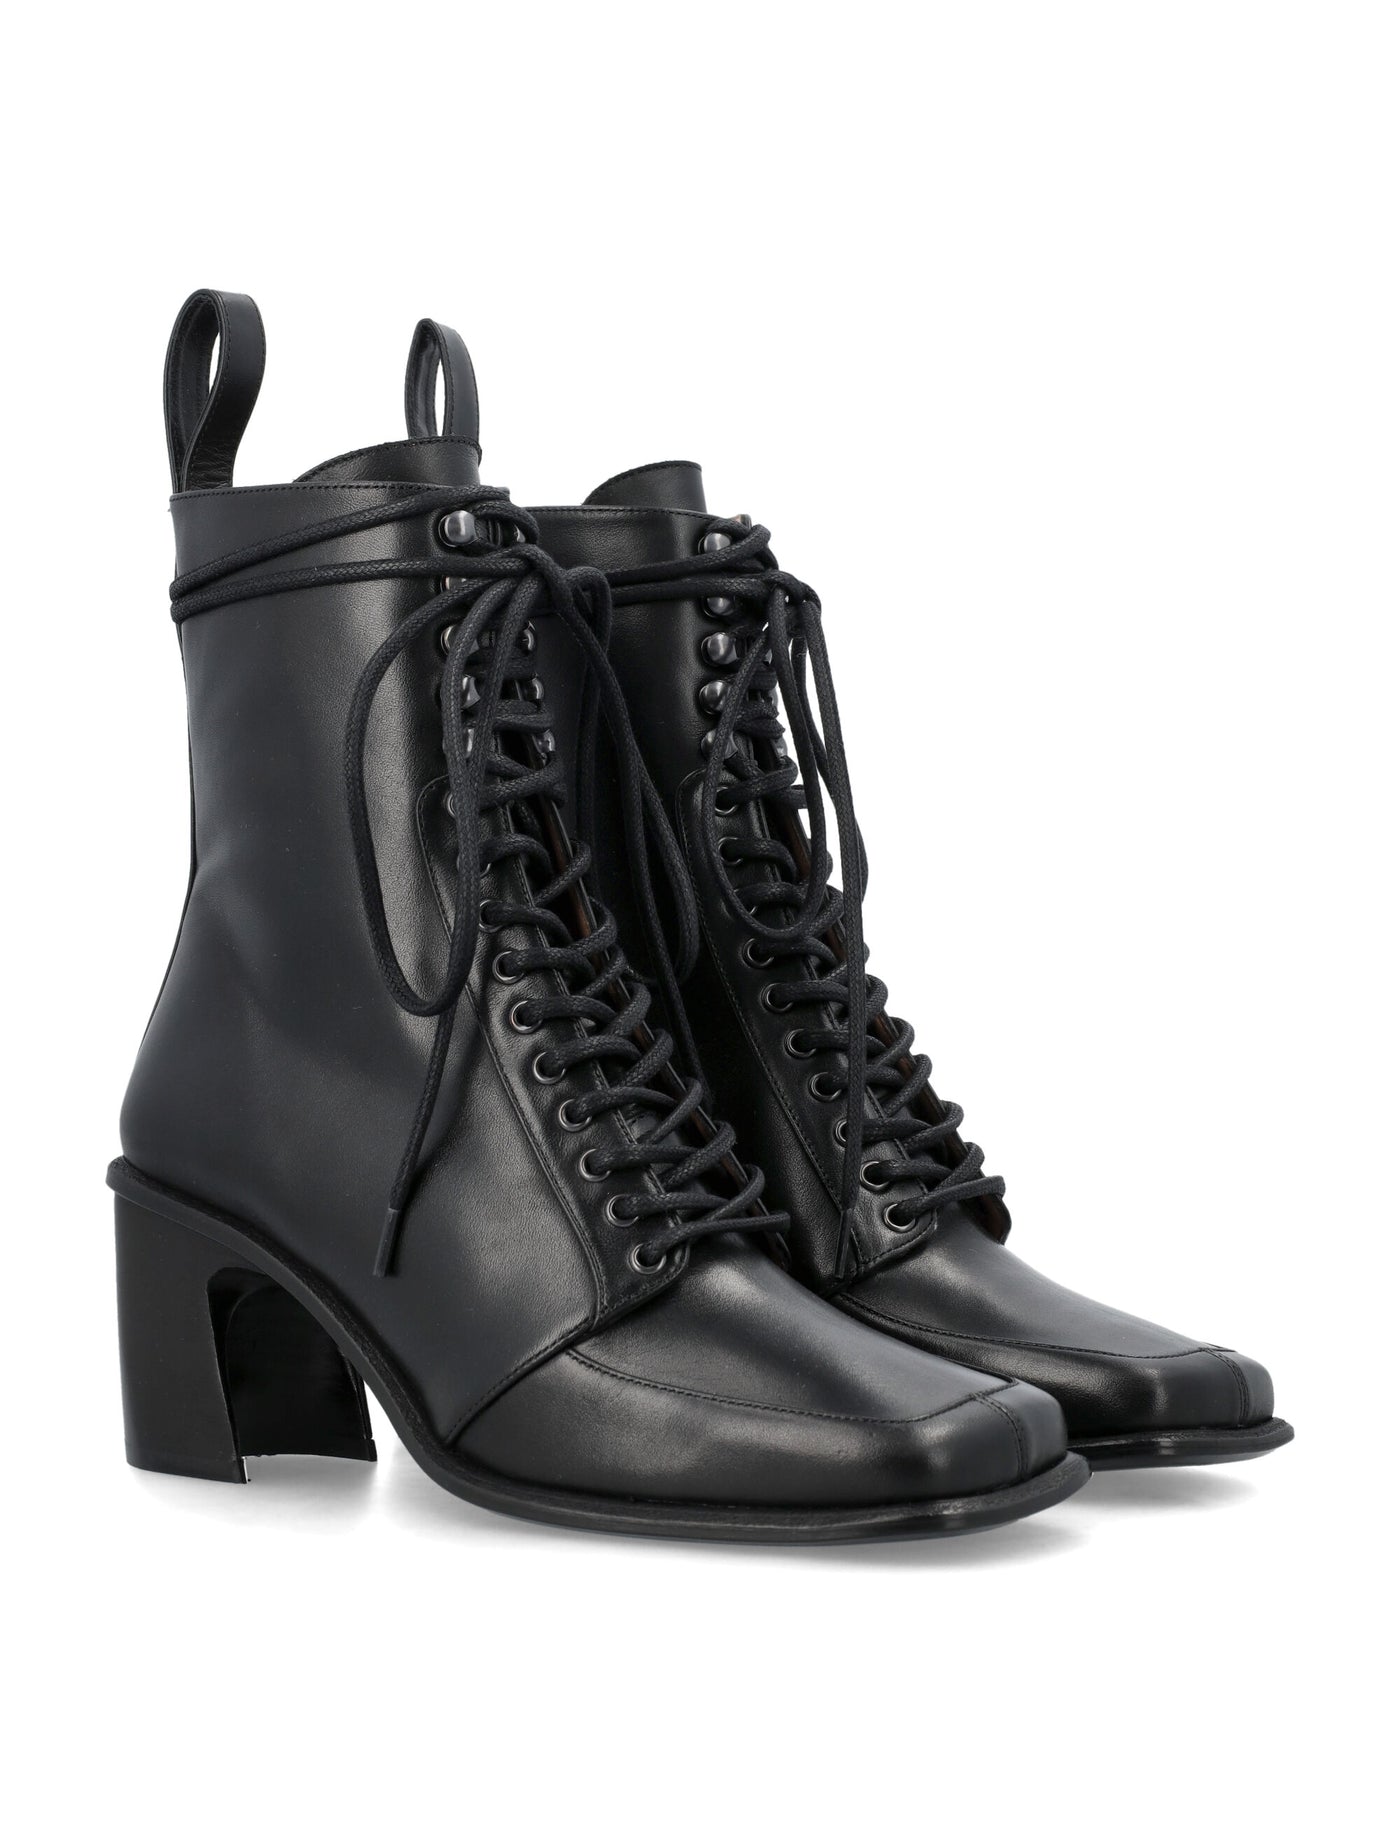 Marine Serre Leather Spoor Lace-Up Boots